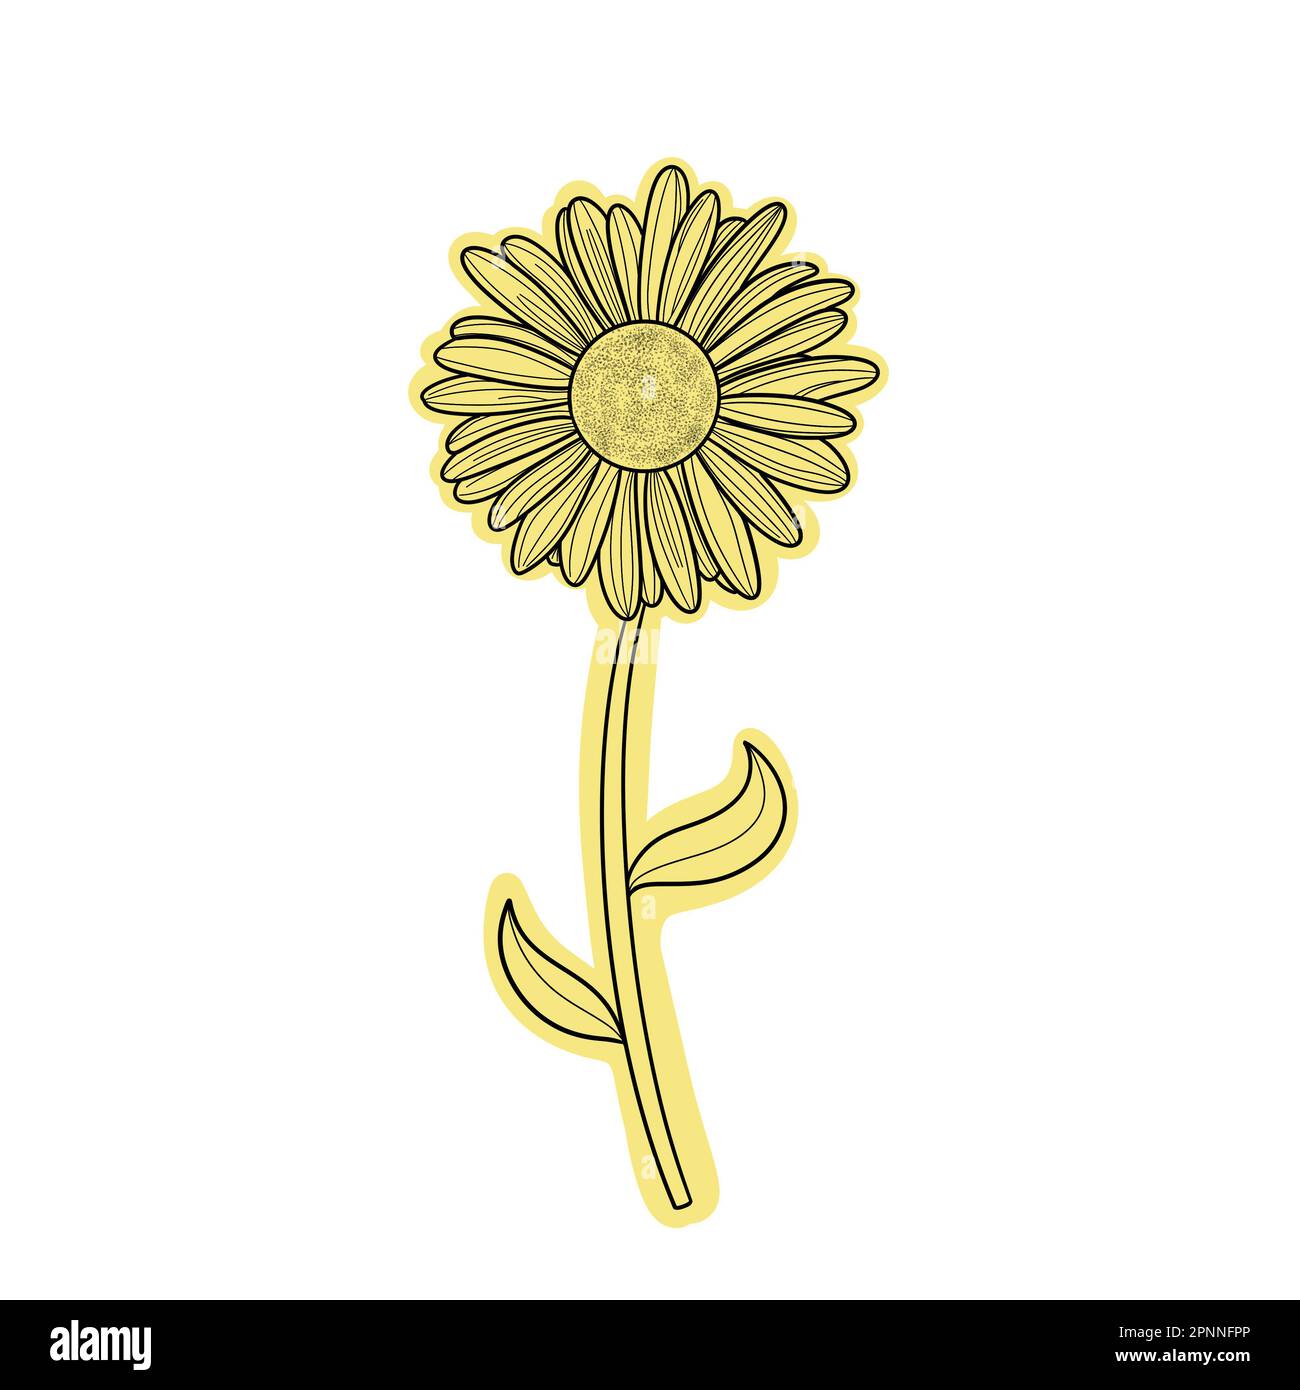 Yellow daisy  flower icon. It is a versatile illustration designed for various uses. Stock Photo